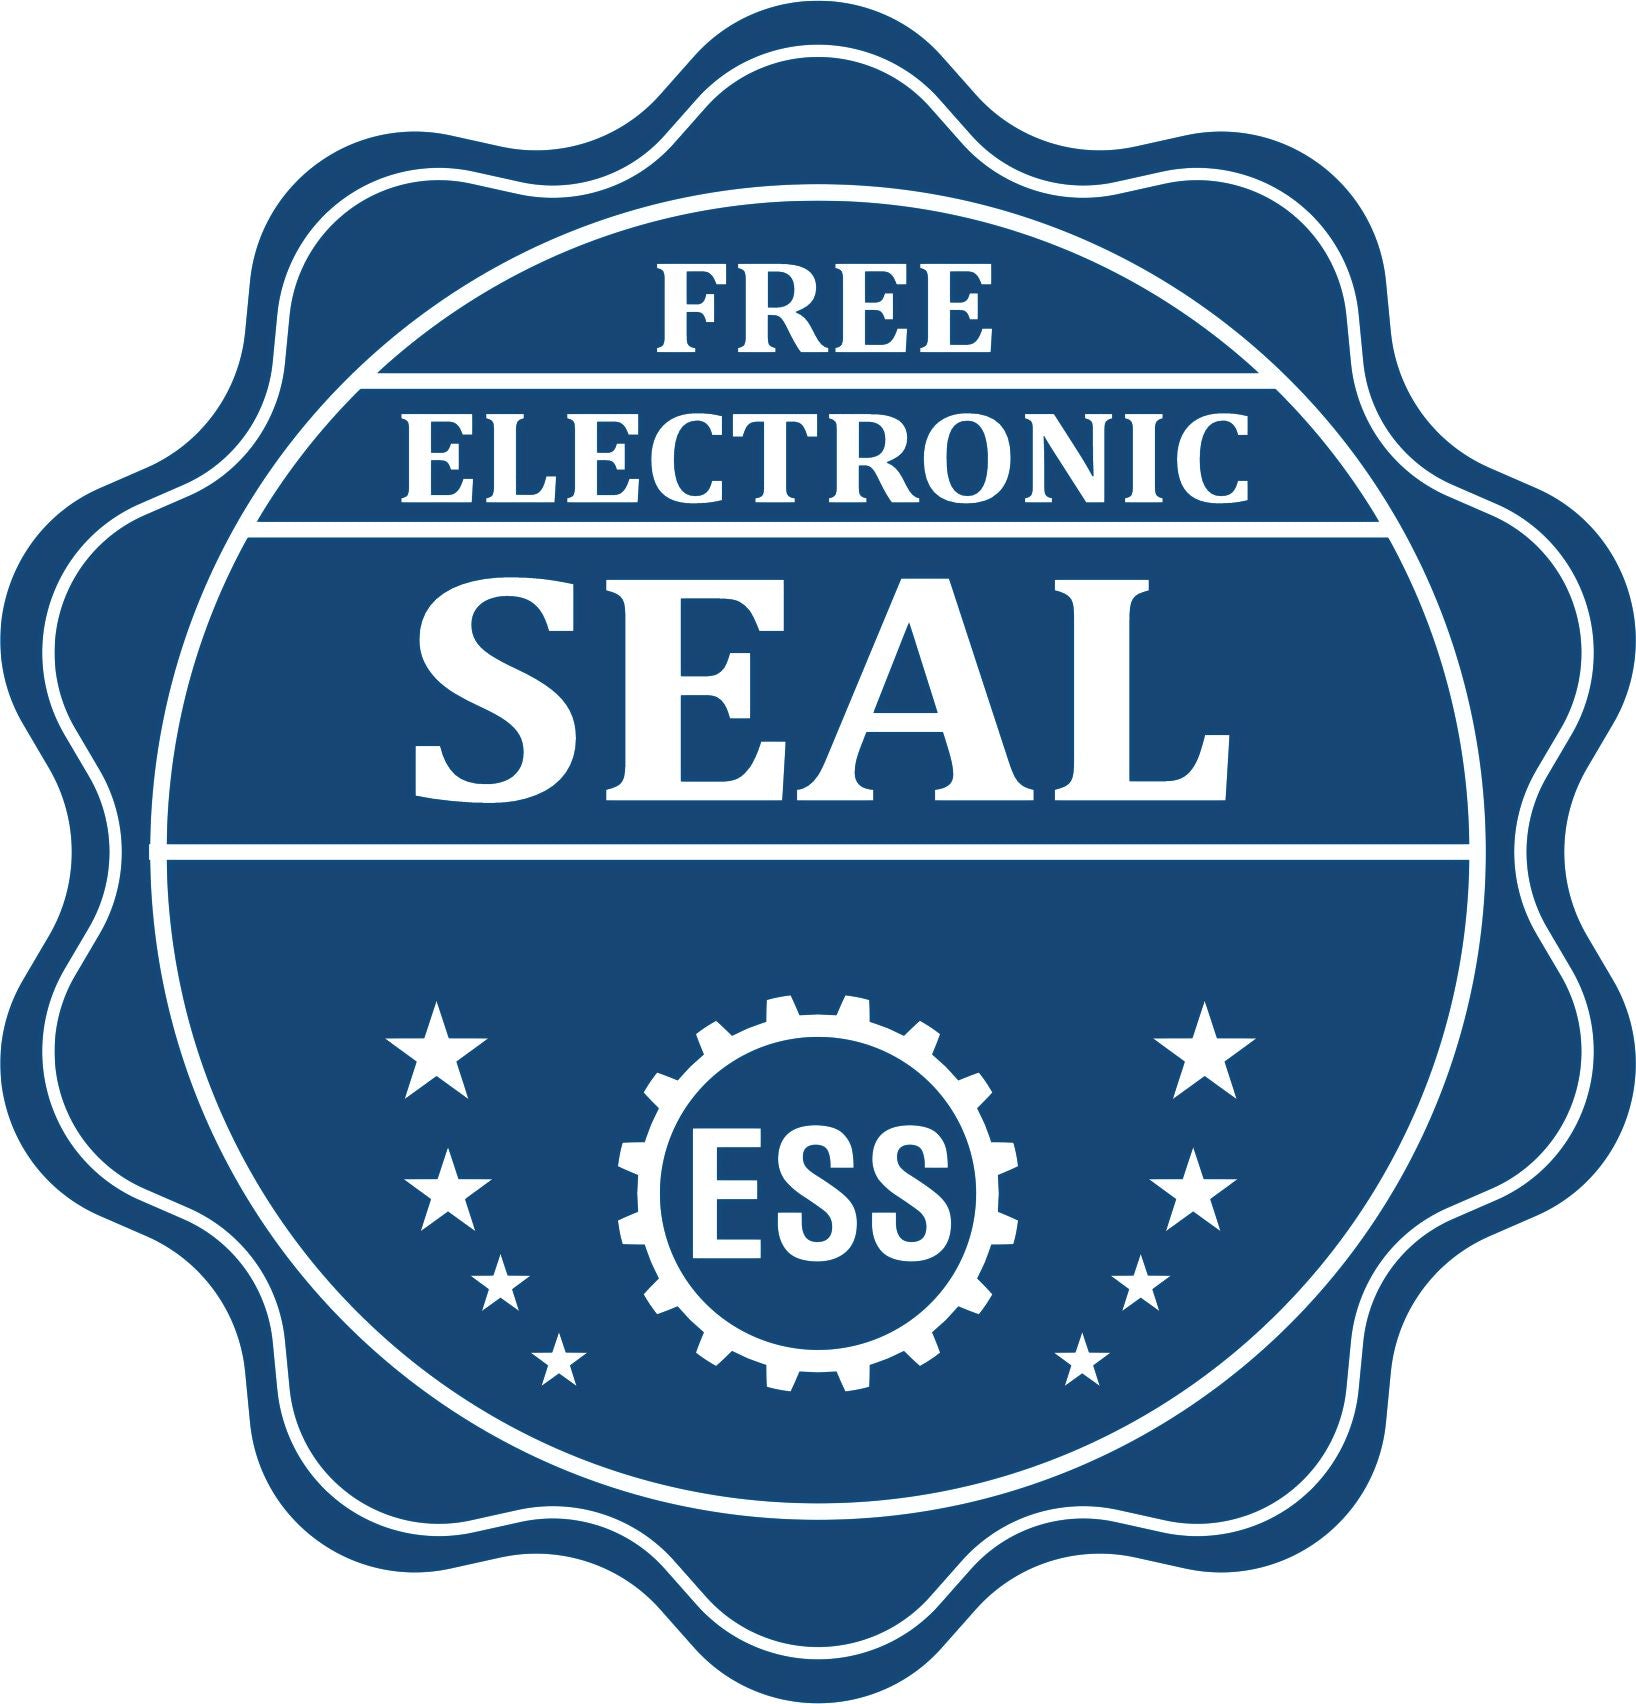 A badge showing a free electronic seal for the State of North Dakota Extended Long Reach Engineer Seal with stars and the ESS gear on the emblem.